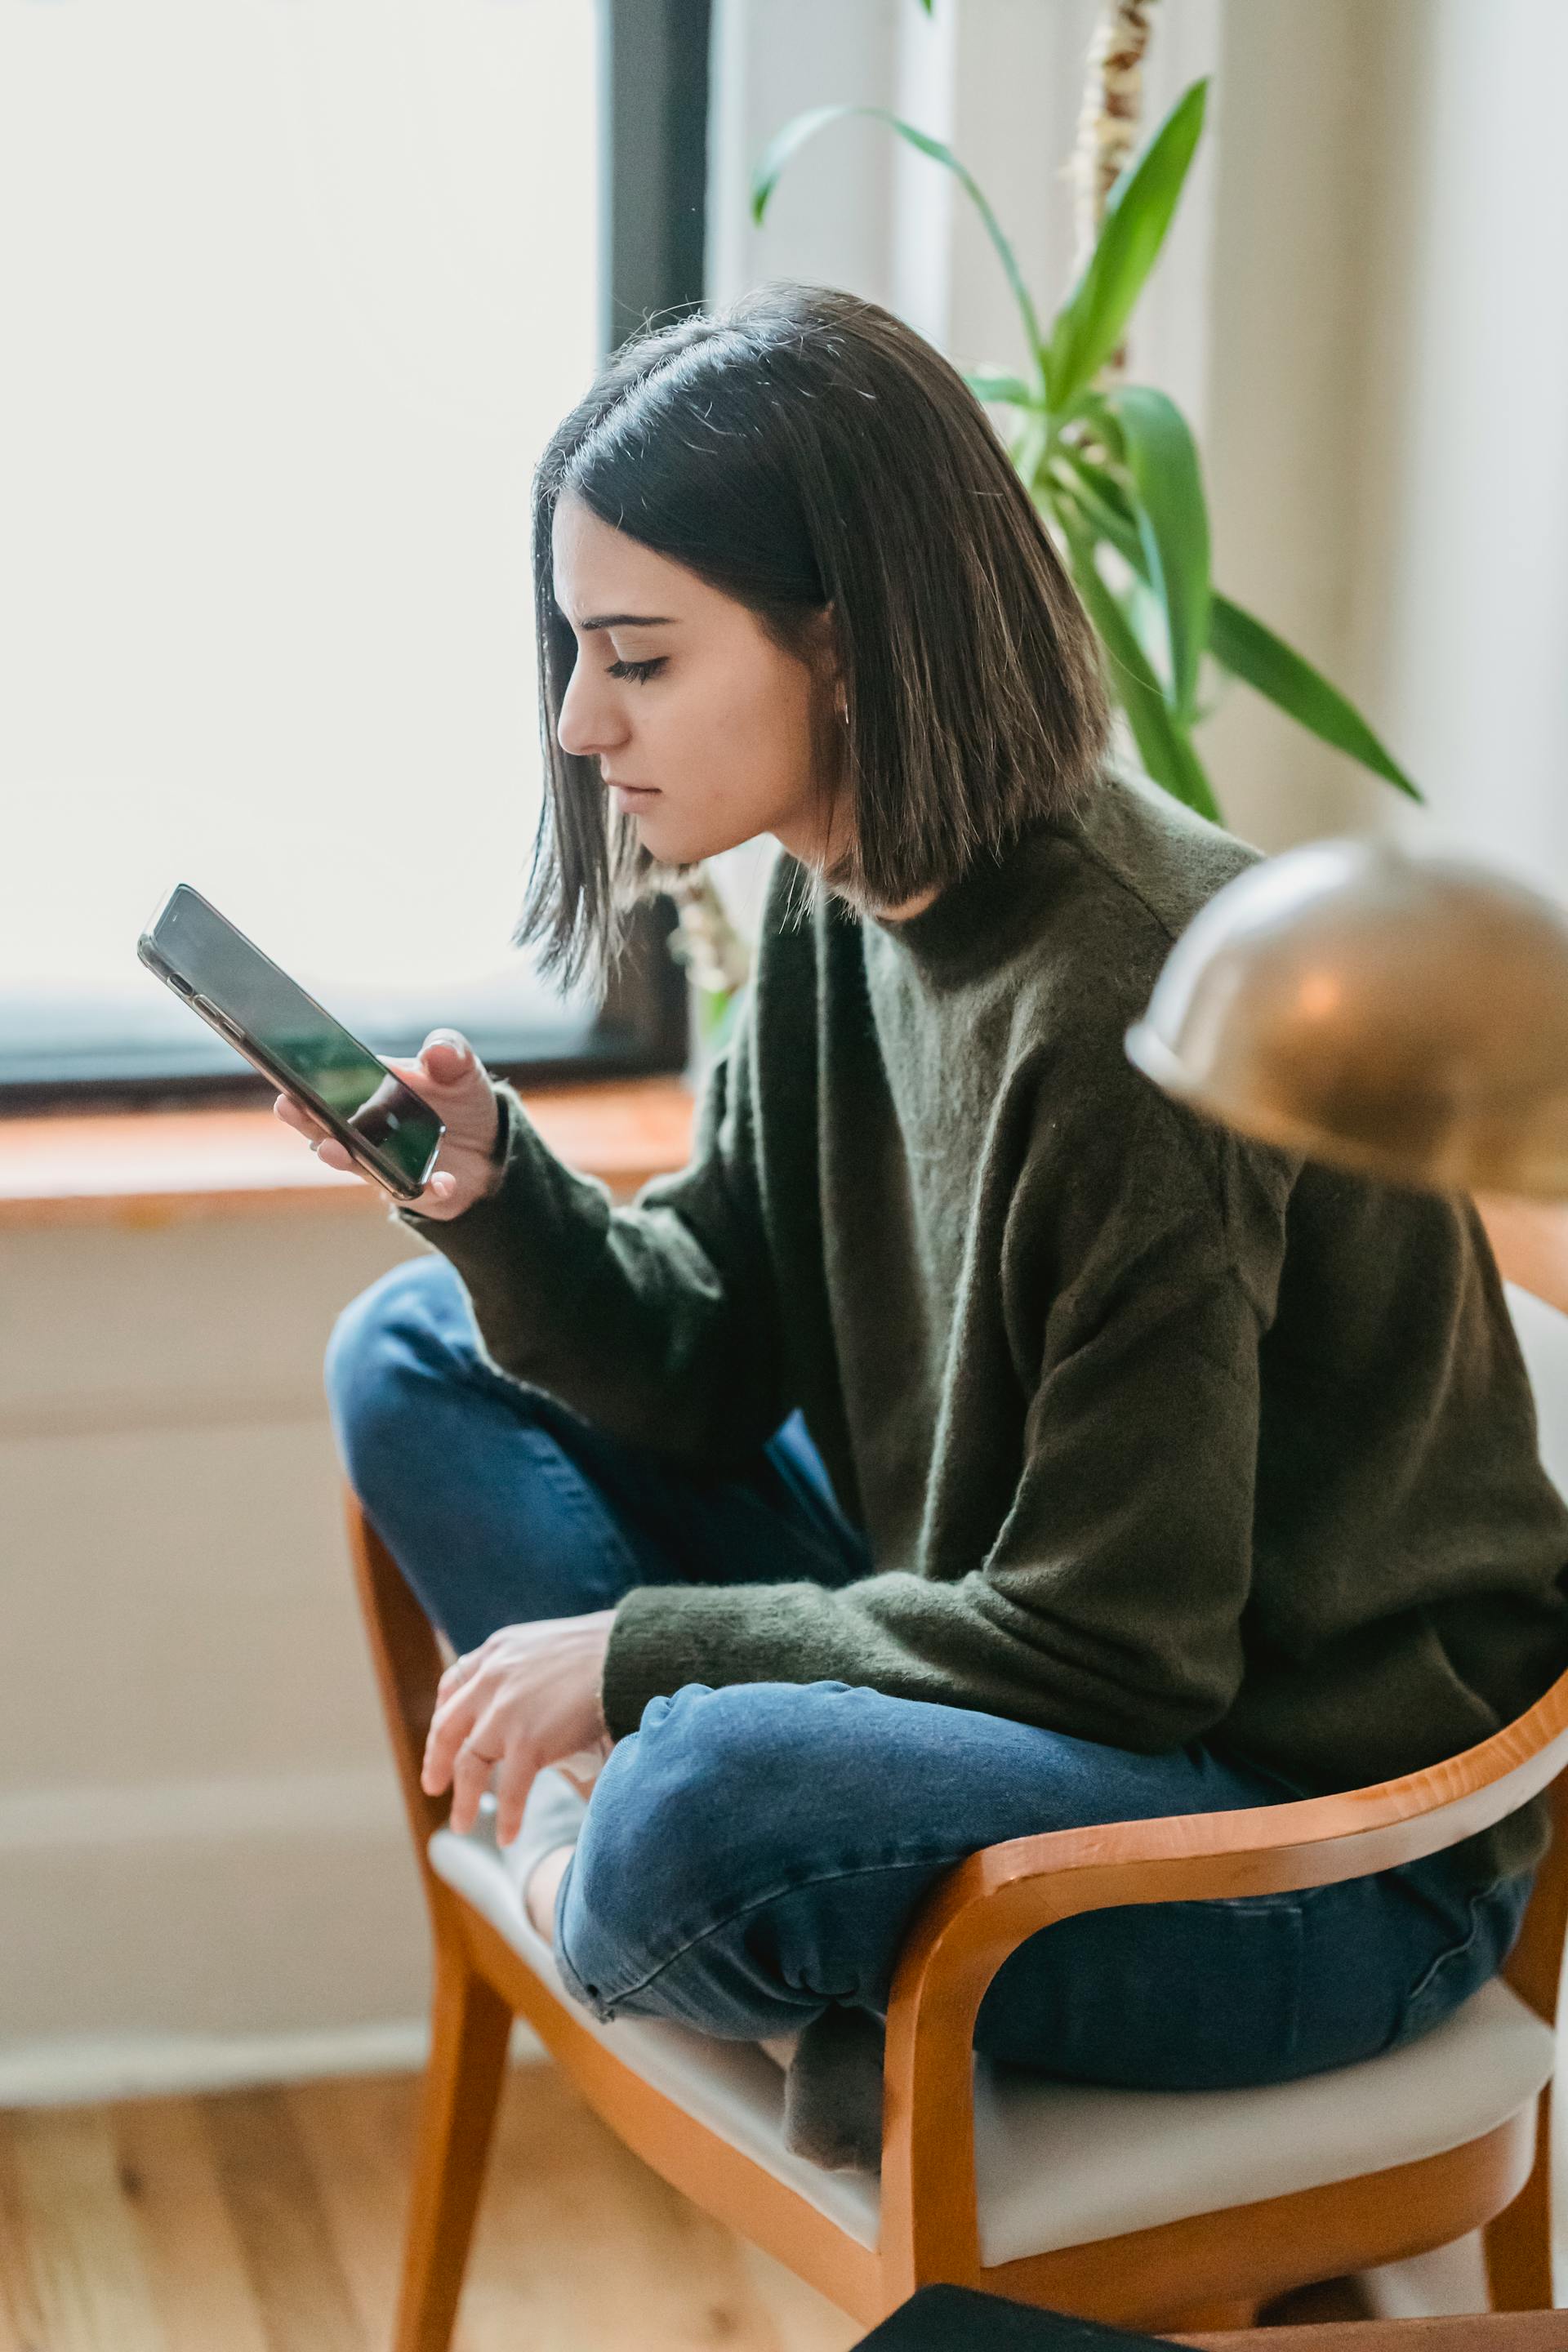 A woman sitting on a chair and looking at her phone | Source: Pexels